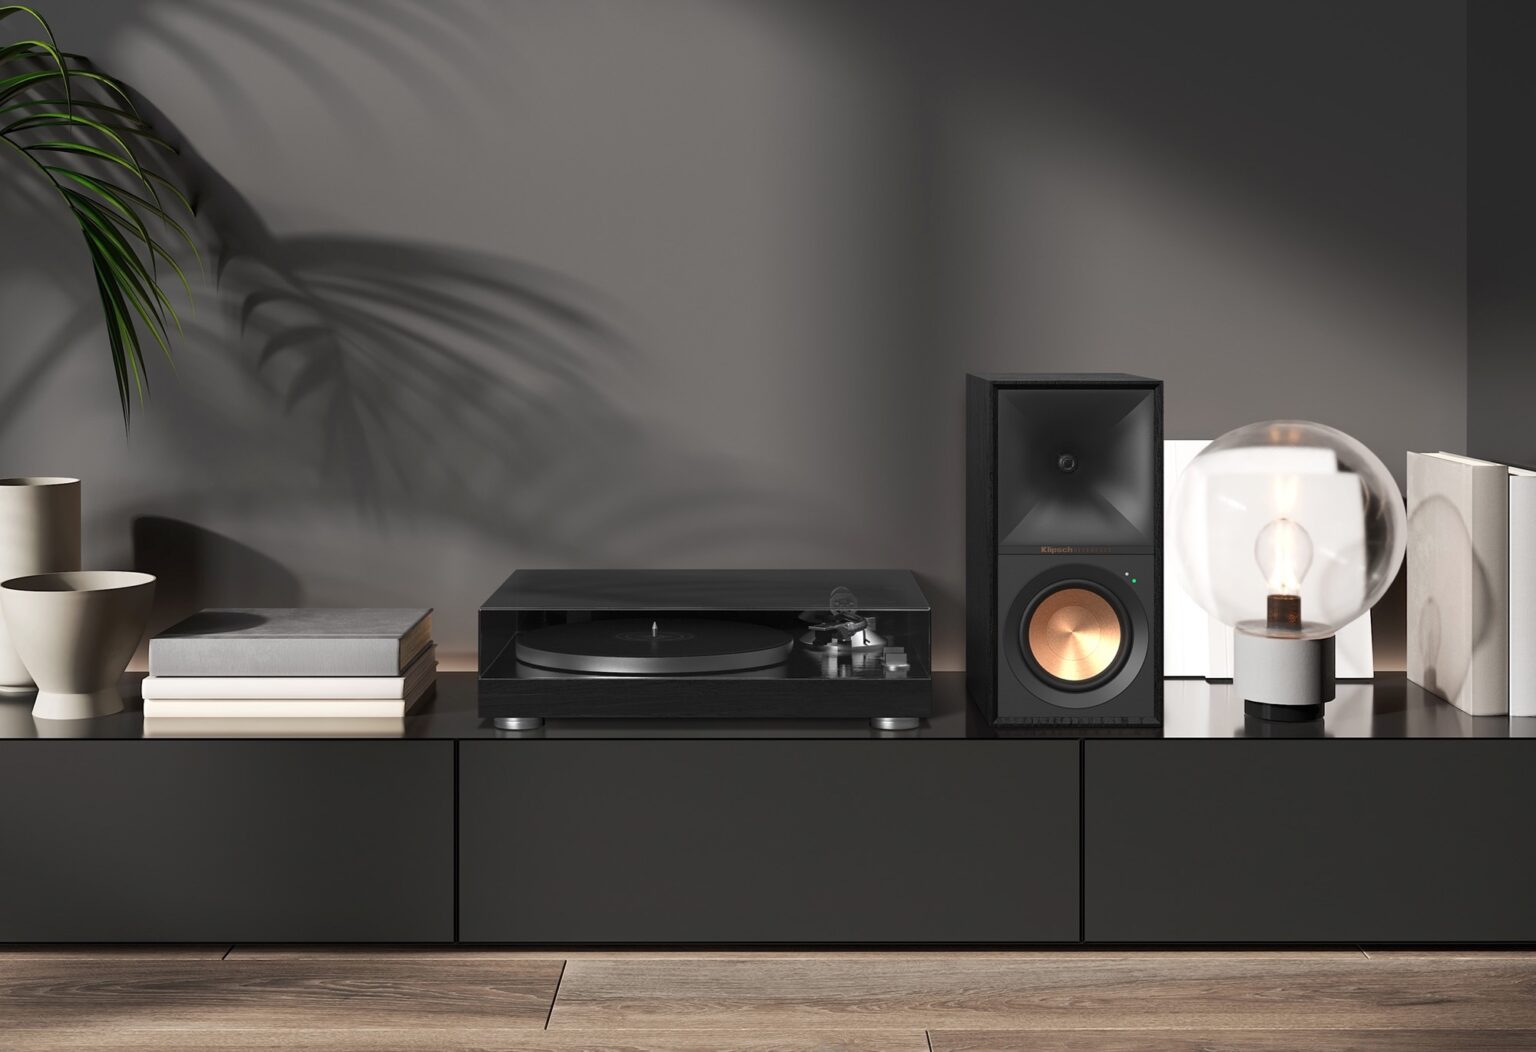 Klipsch's new R-40PM and R-50PM (pictured) have connectivity built in for turntables and almost any other sound source.